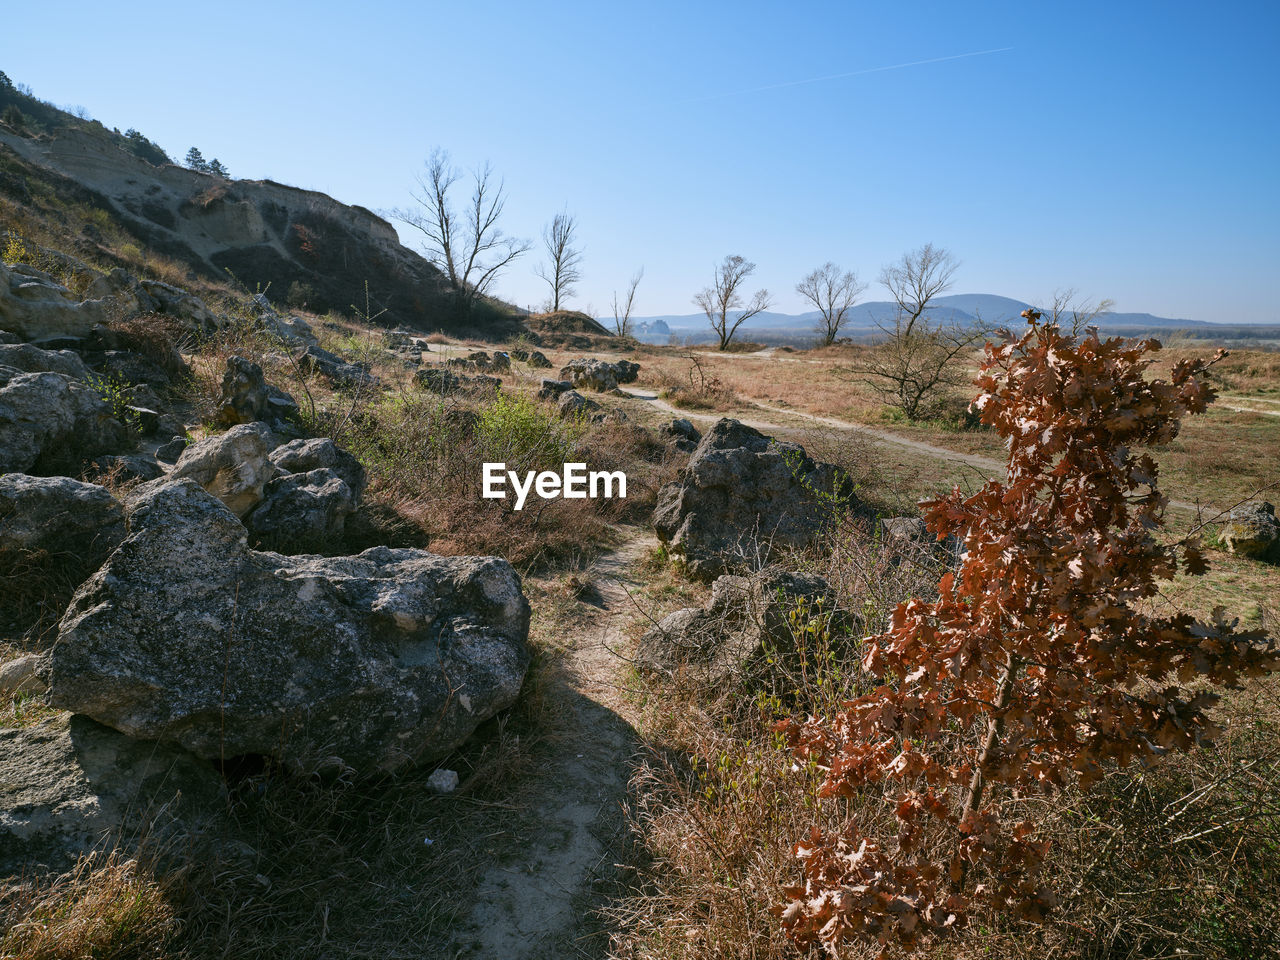 Rocky hill Sandberg and footpath to Devin castle, Slovakia Landscape Rock Rocks Rocky Tourism Path Footpath Direction Trip Outdoors Background